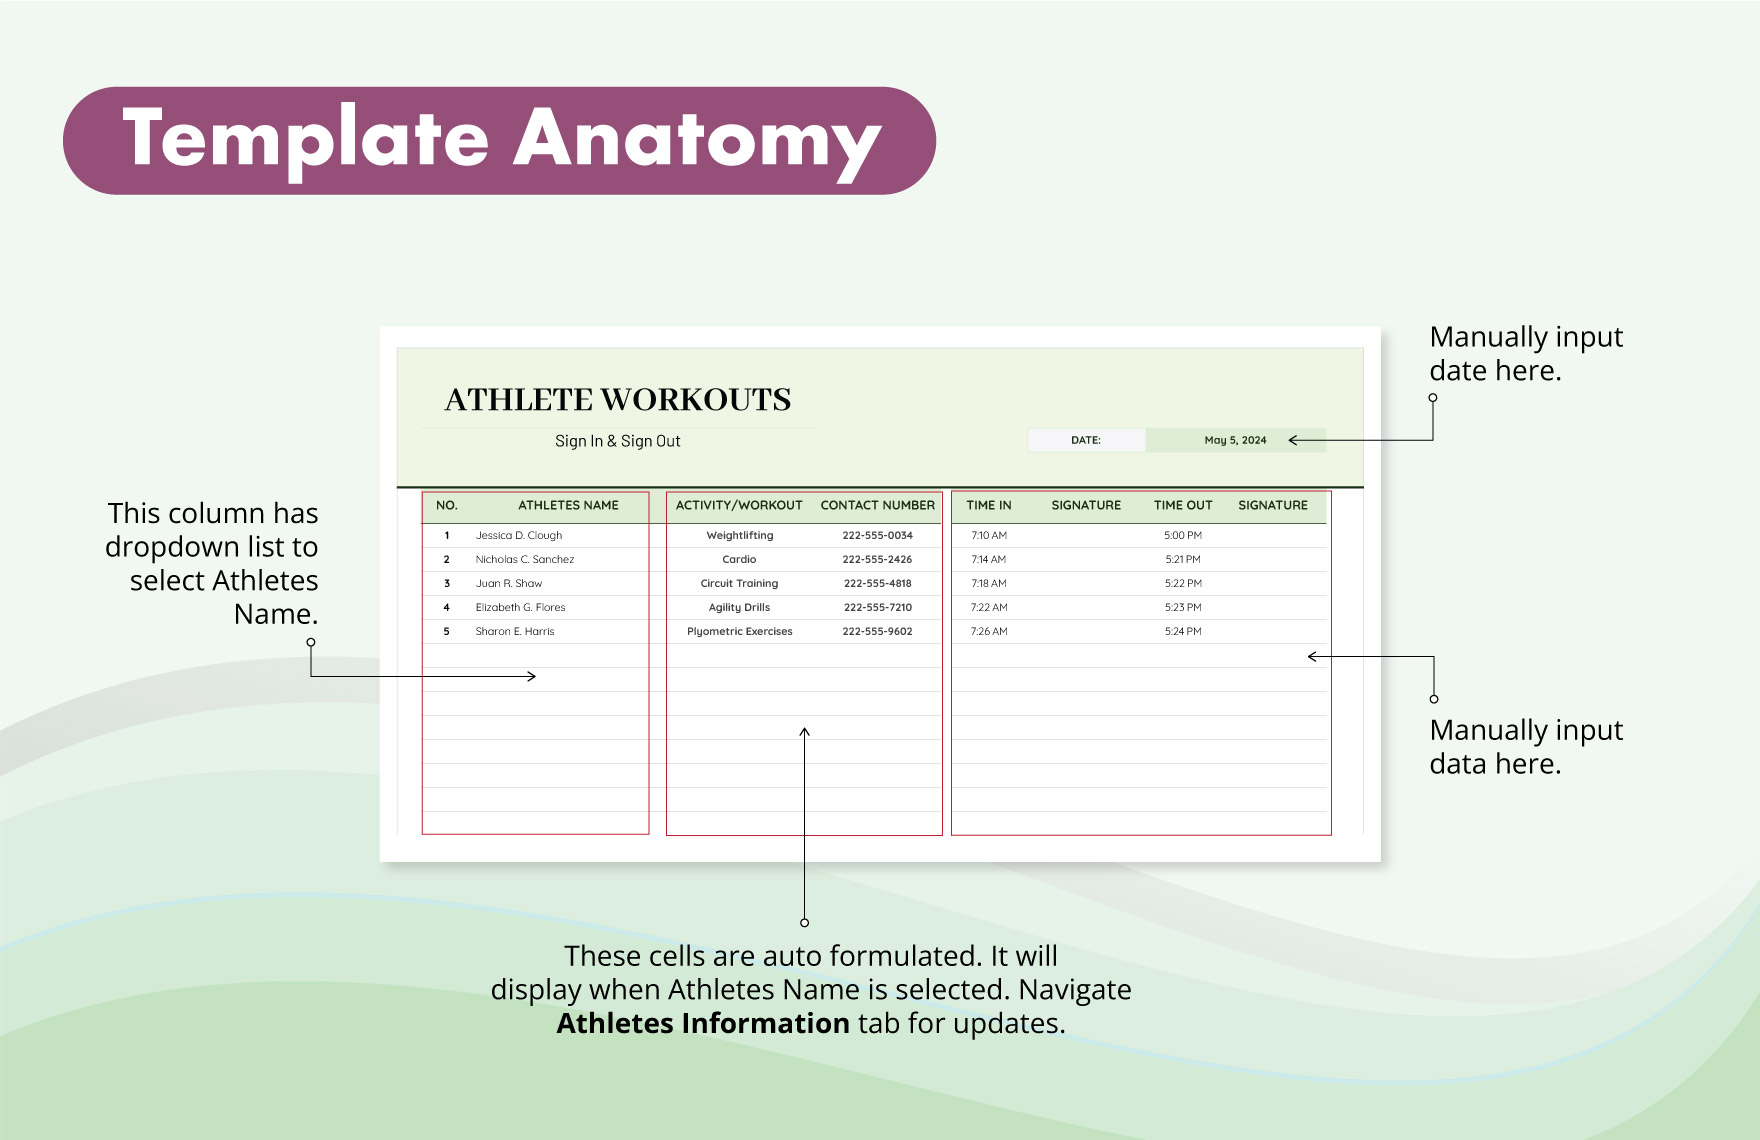 Sign in Sign Out Sheet Template For Athlete Workouts Template